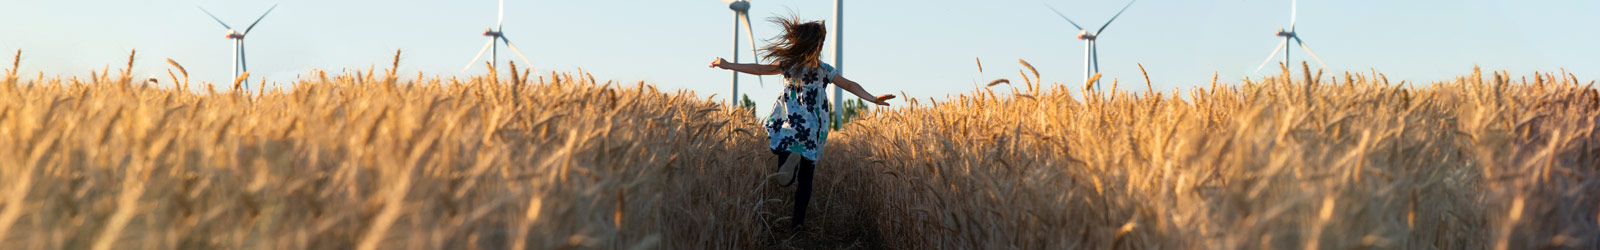 Young girl running through a field with wind turbines in the background.